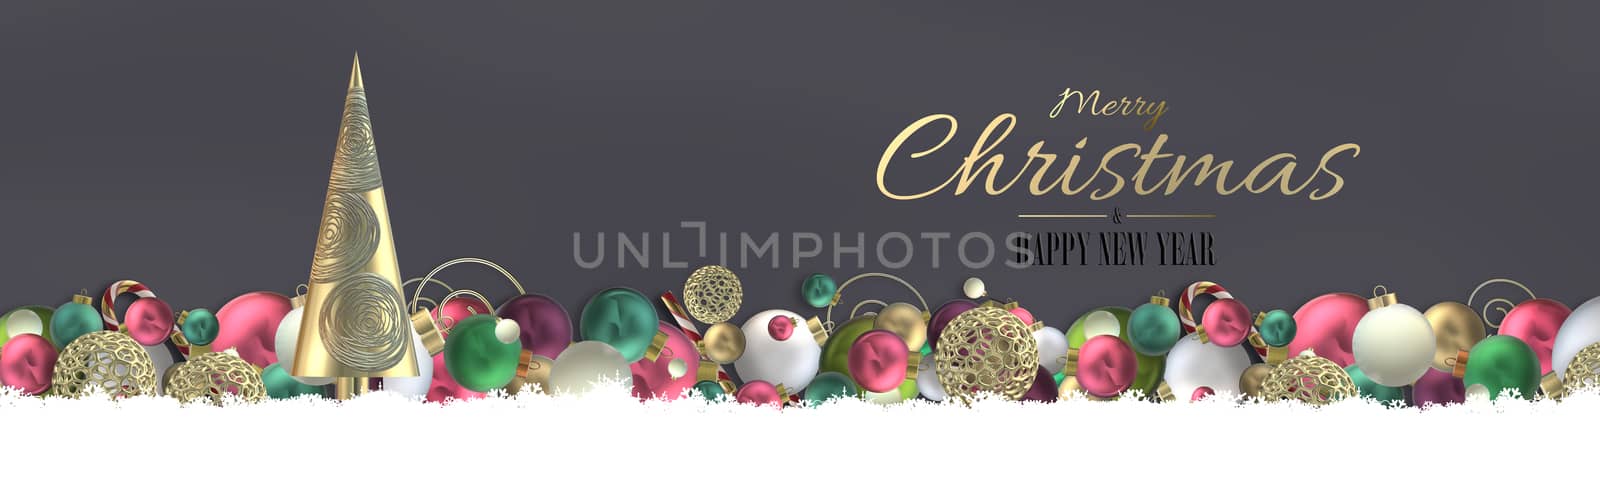 Horizontal Xmas background banner on dark grey with Christmas symbol 3D realistic shiny red green gold balls on grey brown background. Text Merry Christmas Happy New Year. Holiday design in 3D render